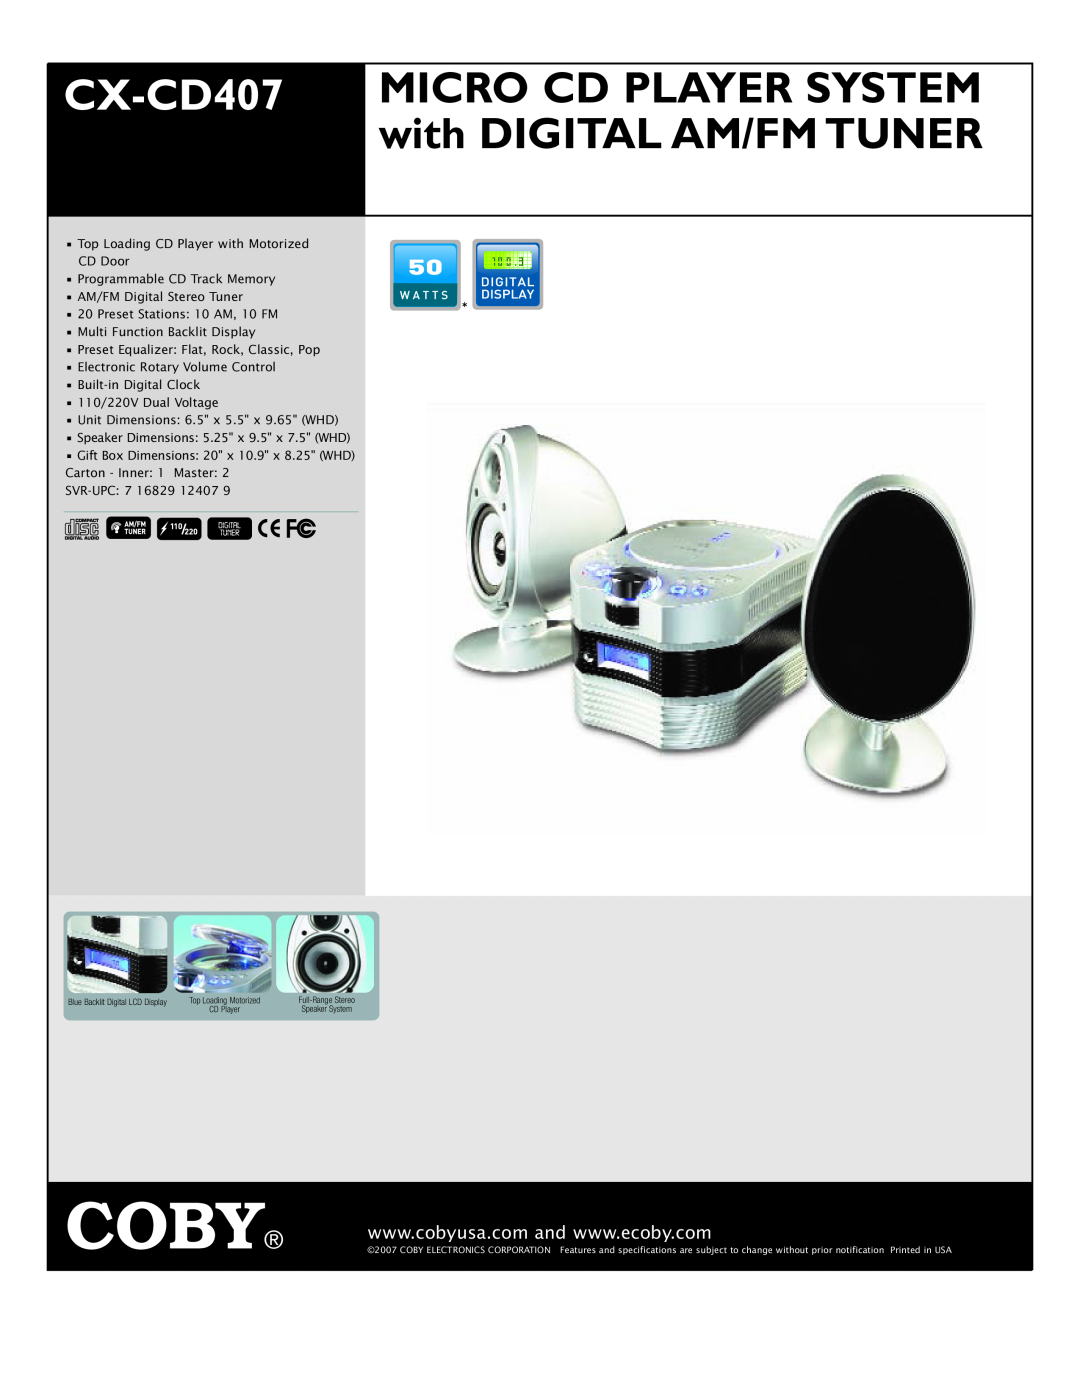 COBY electronic CX-CD407 specifications Coby 